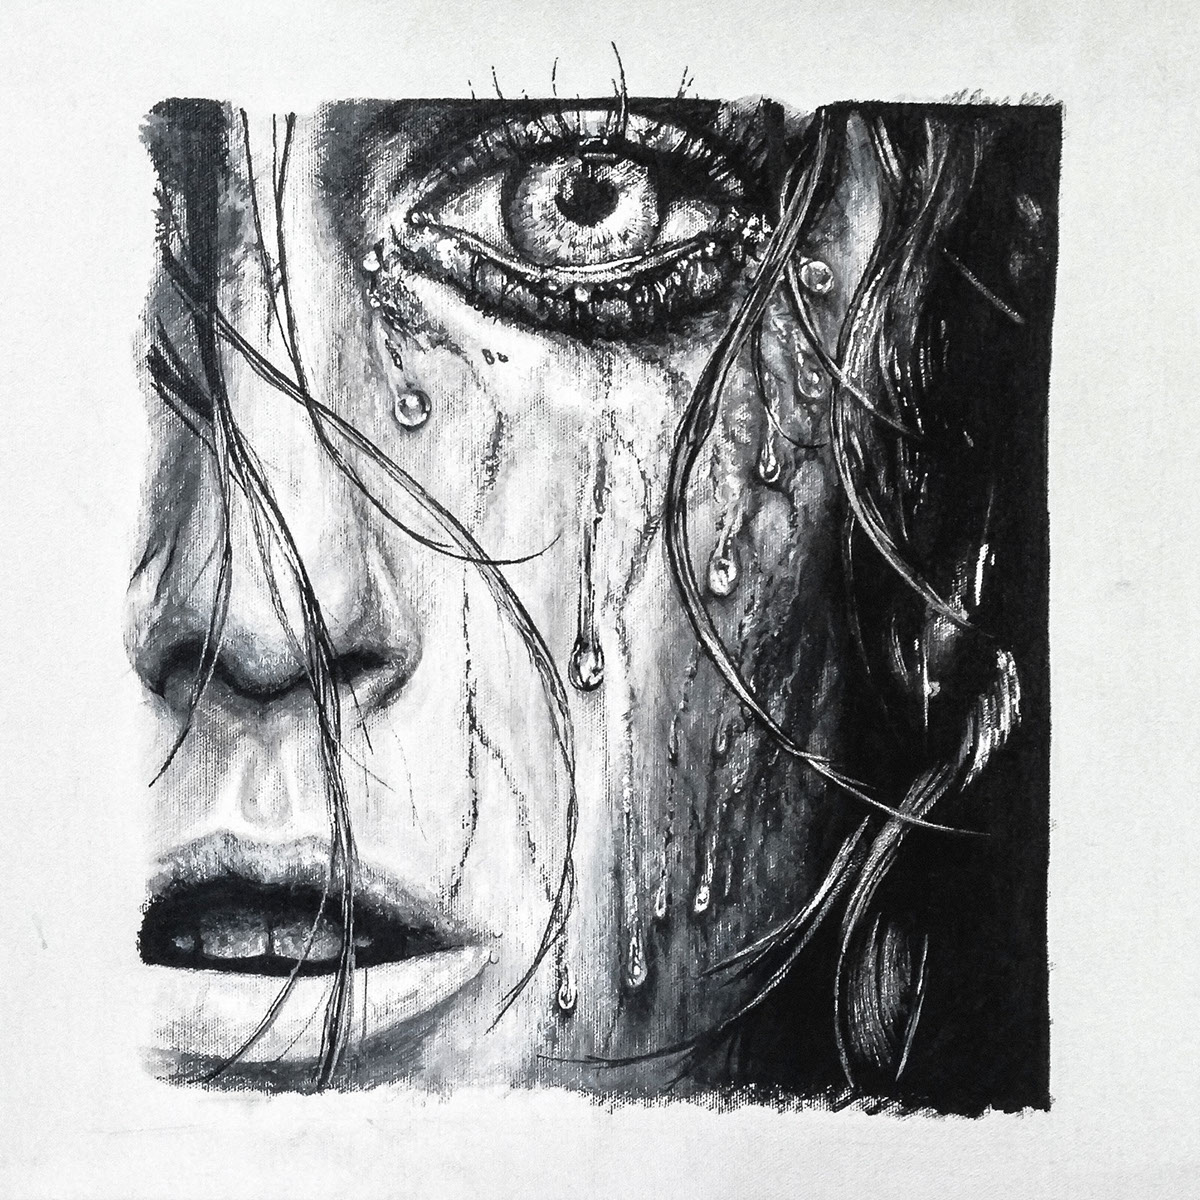 markers sharpie Sharpies crying Emotional mixed media chalk pastel grunge canvas